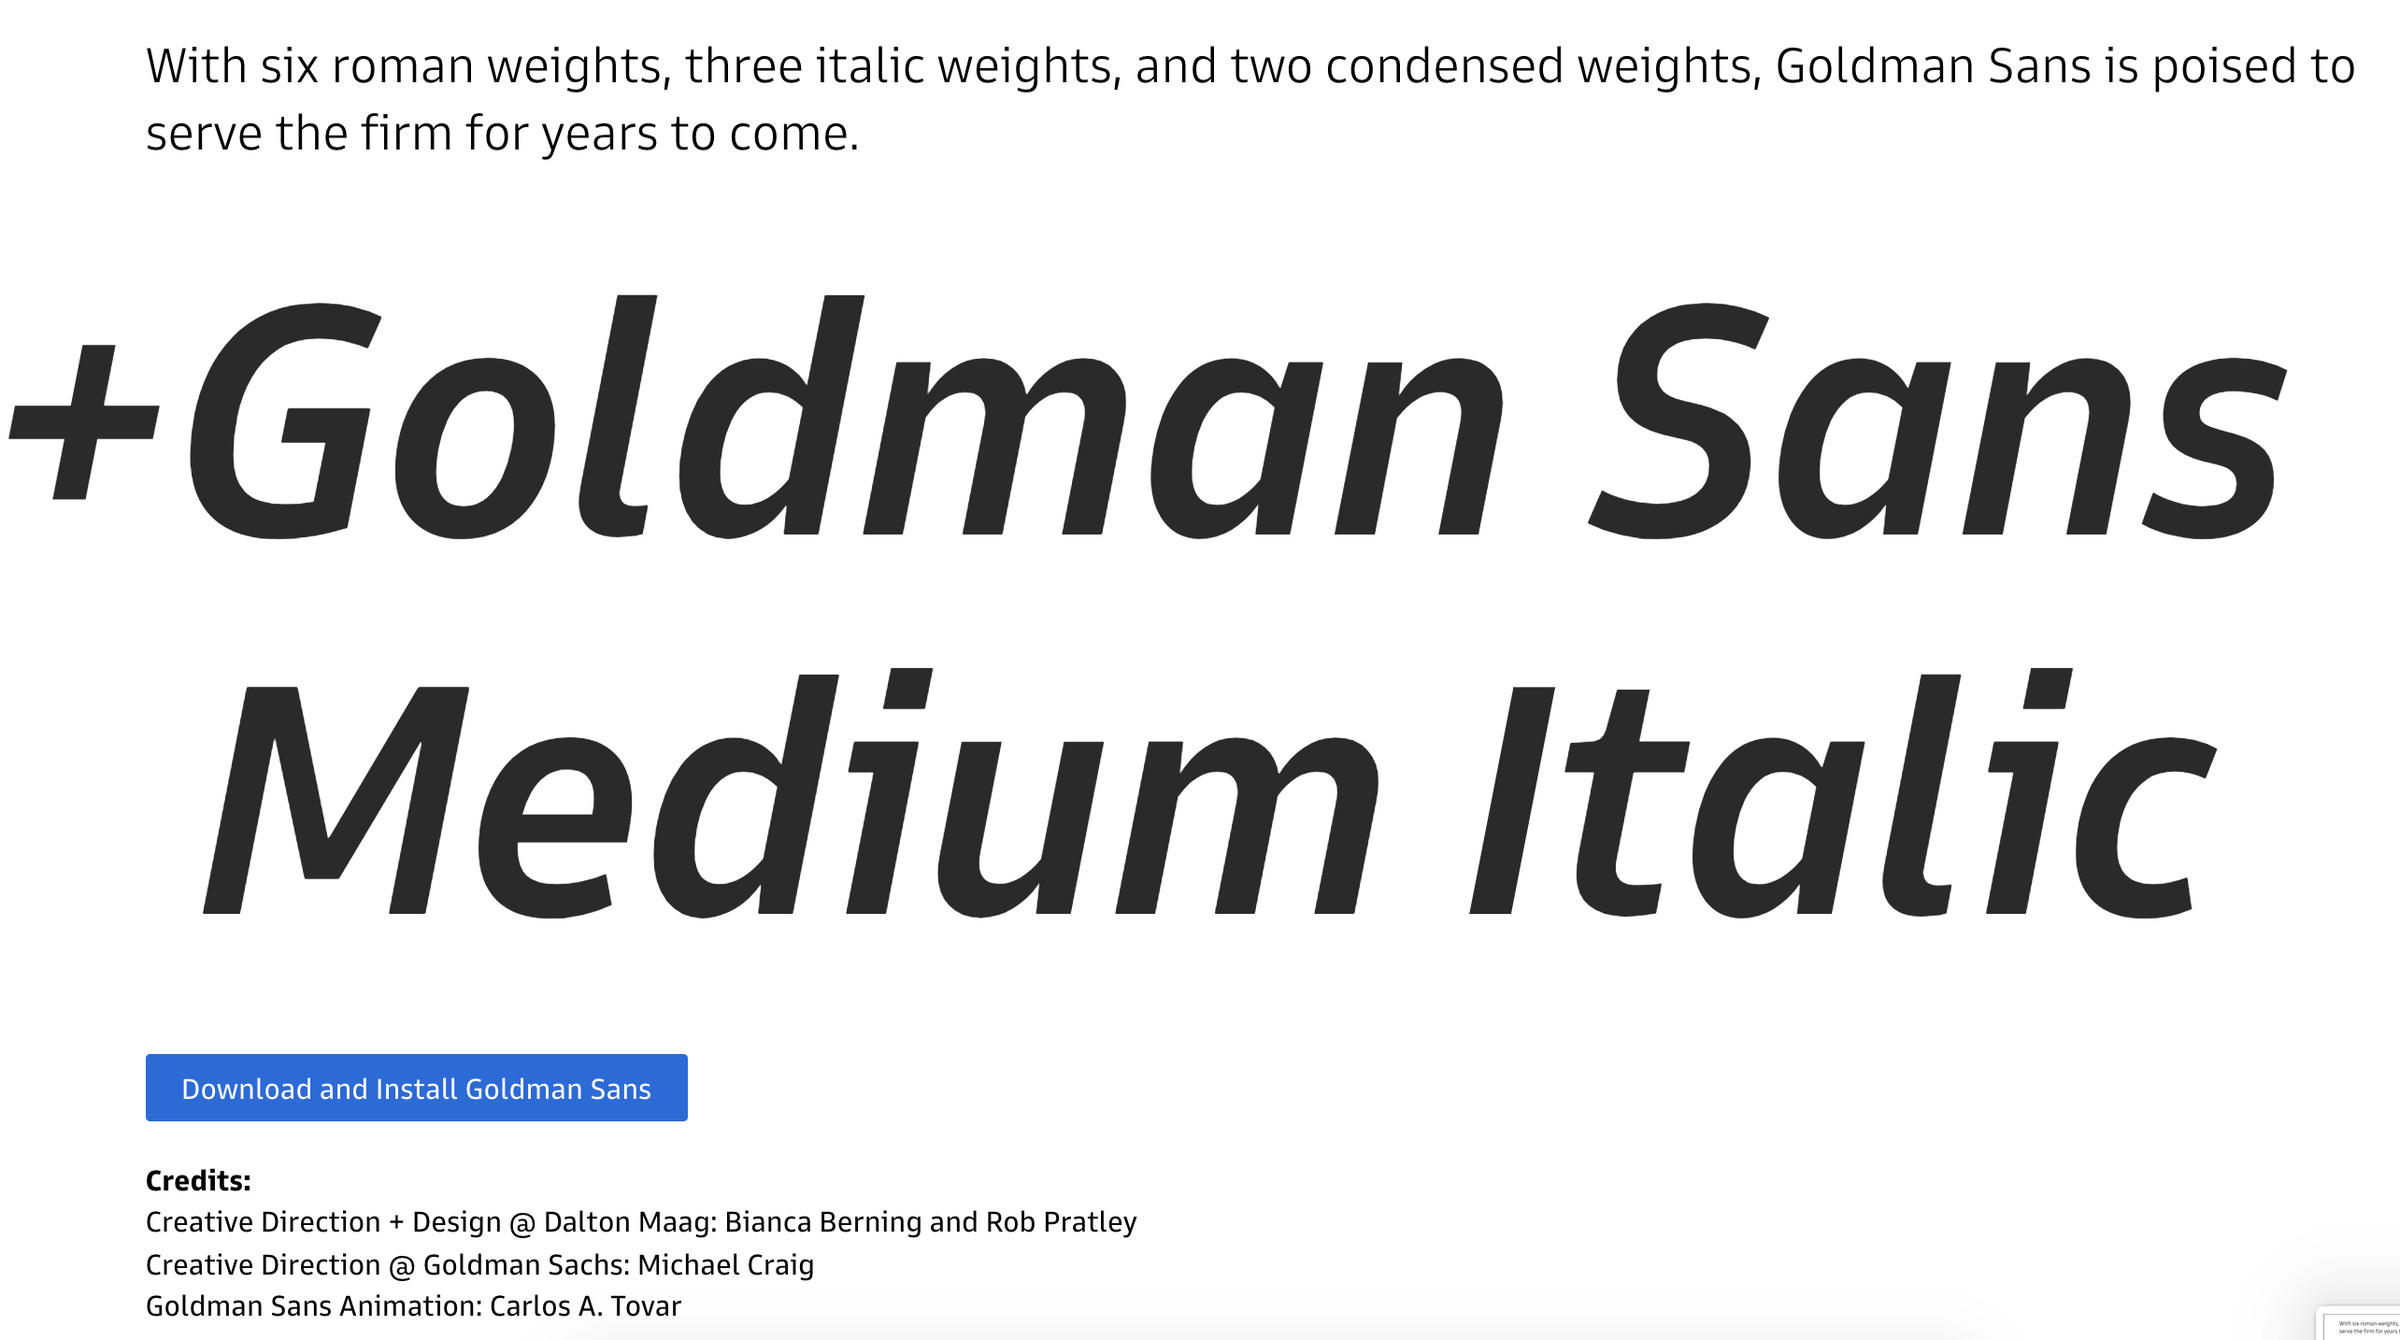 For the pedants in the comments: Goldman Sans is a typeface with 10 fonts of differing weights and styles. 